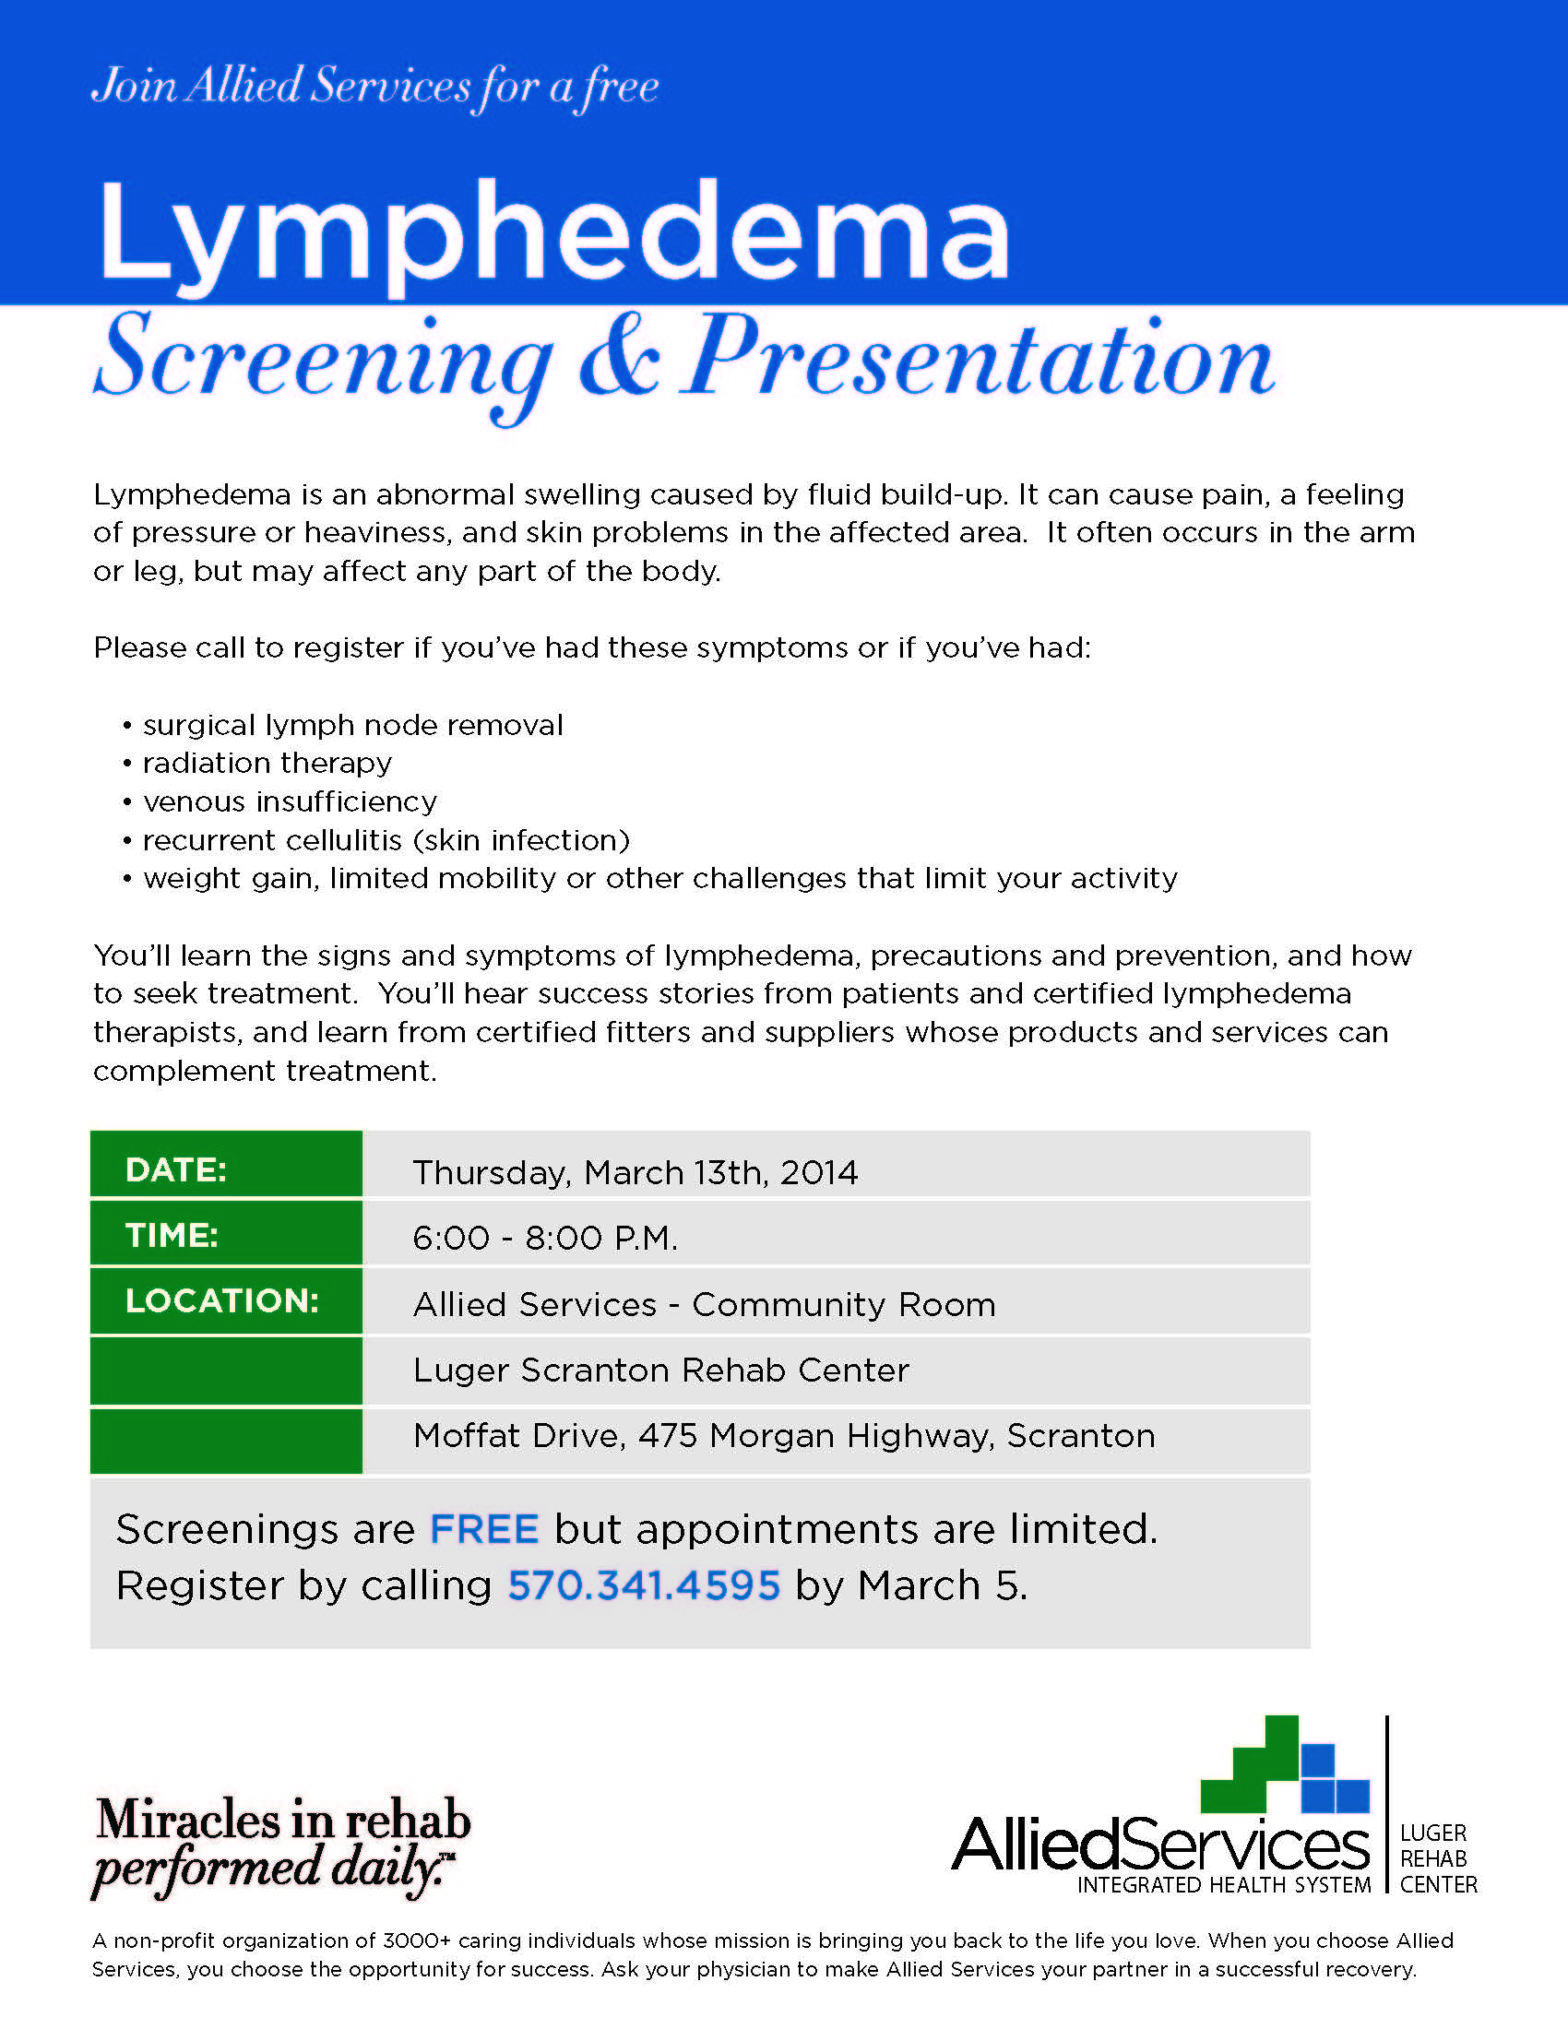 Allied Services to Host Lymphedema Presentation Northeast Regional